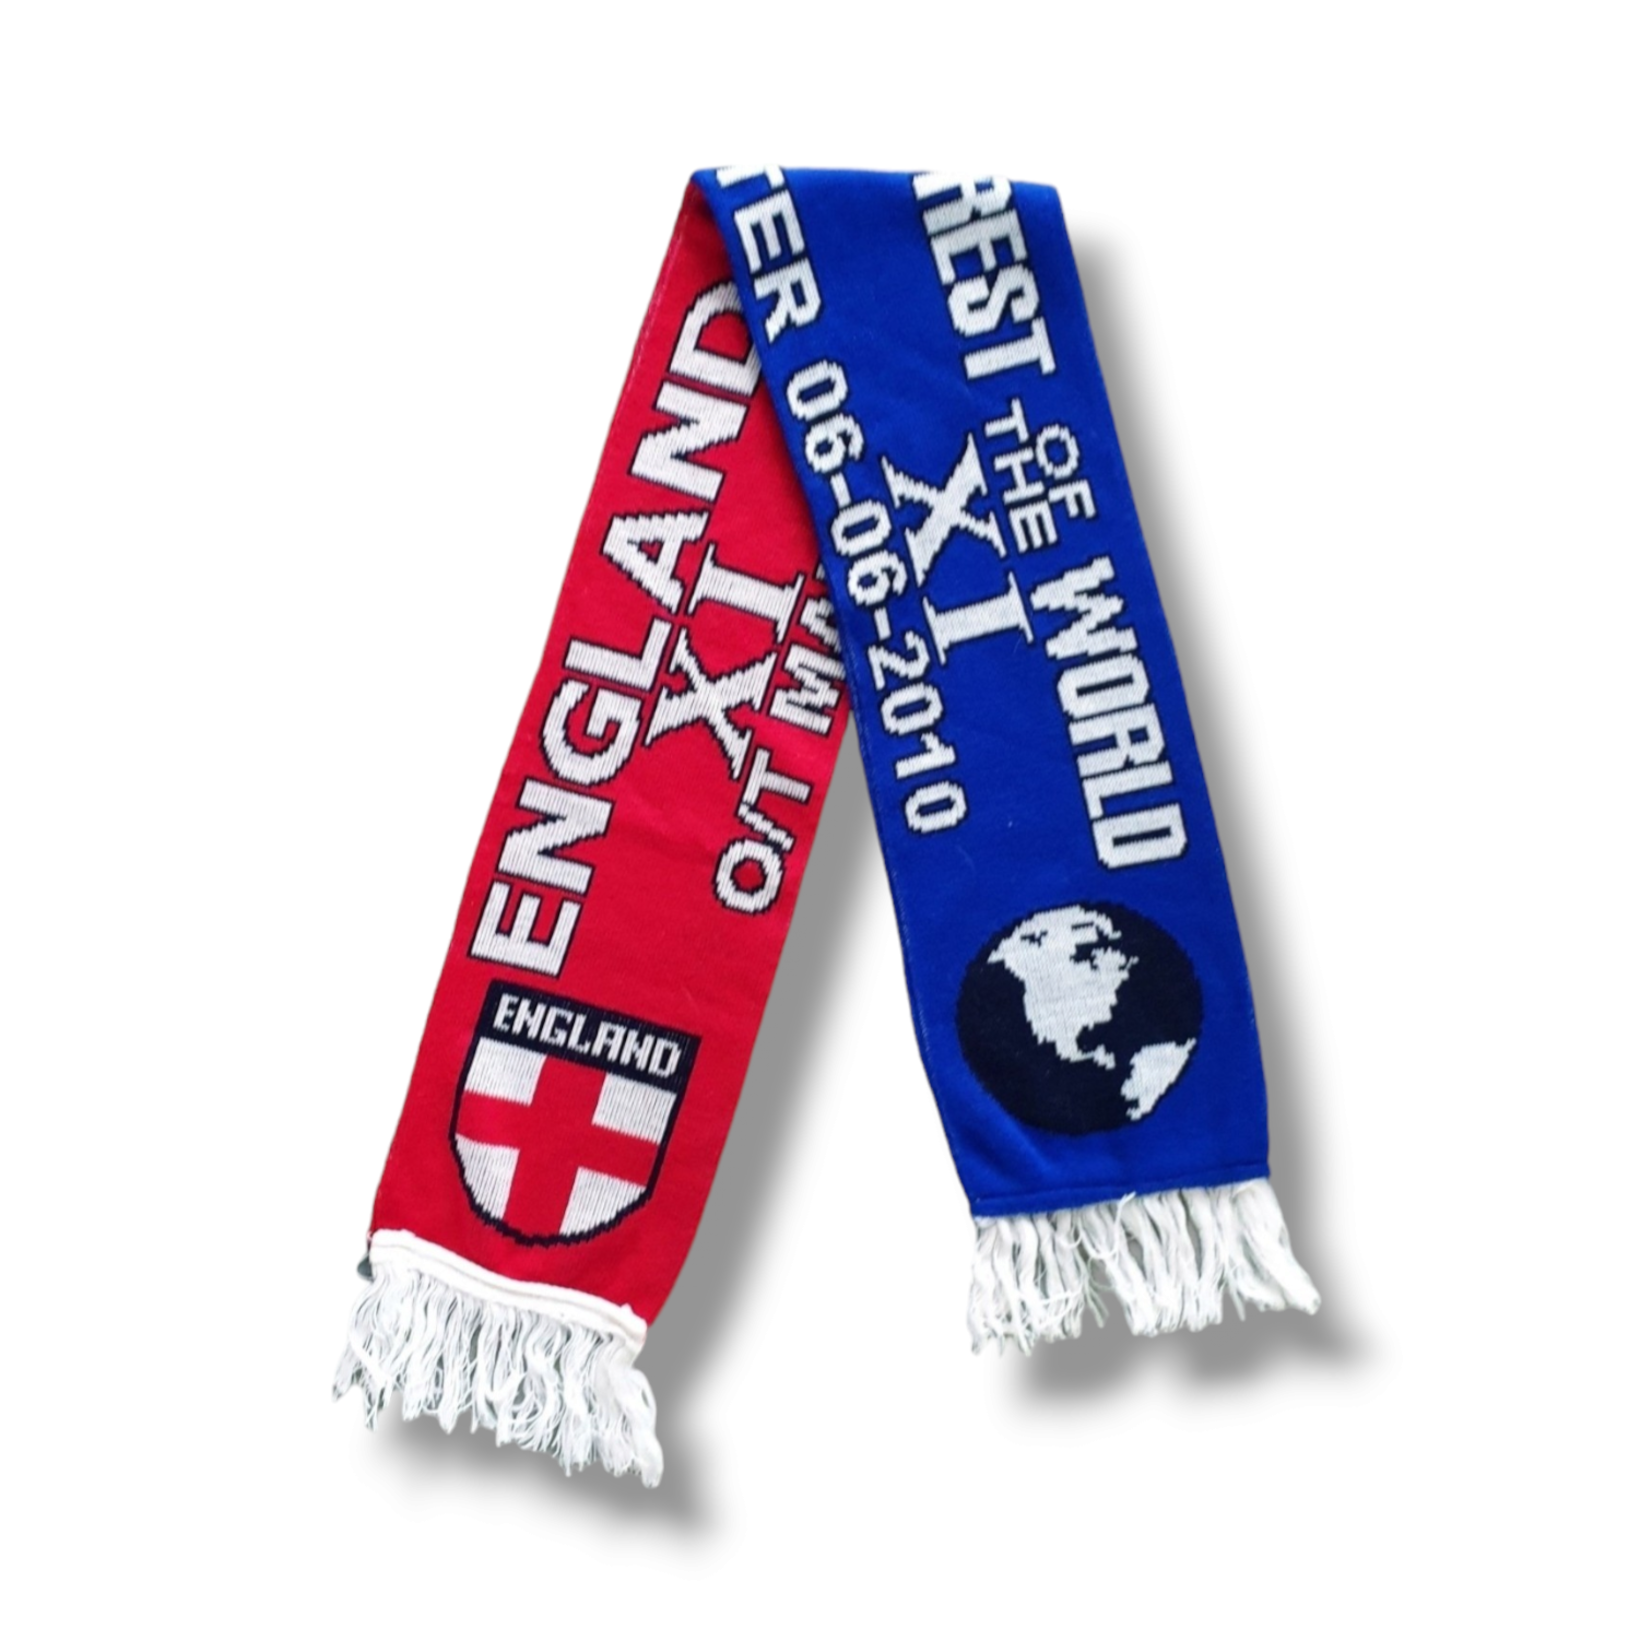 Scarf Origineel Rugby Fansjaal England vs Rest of the World 2010